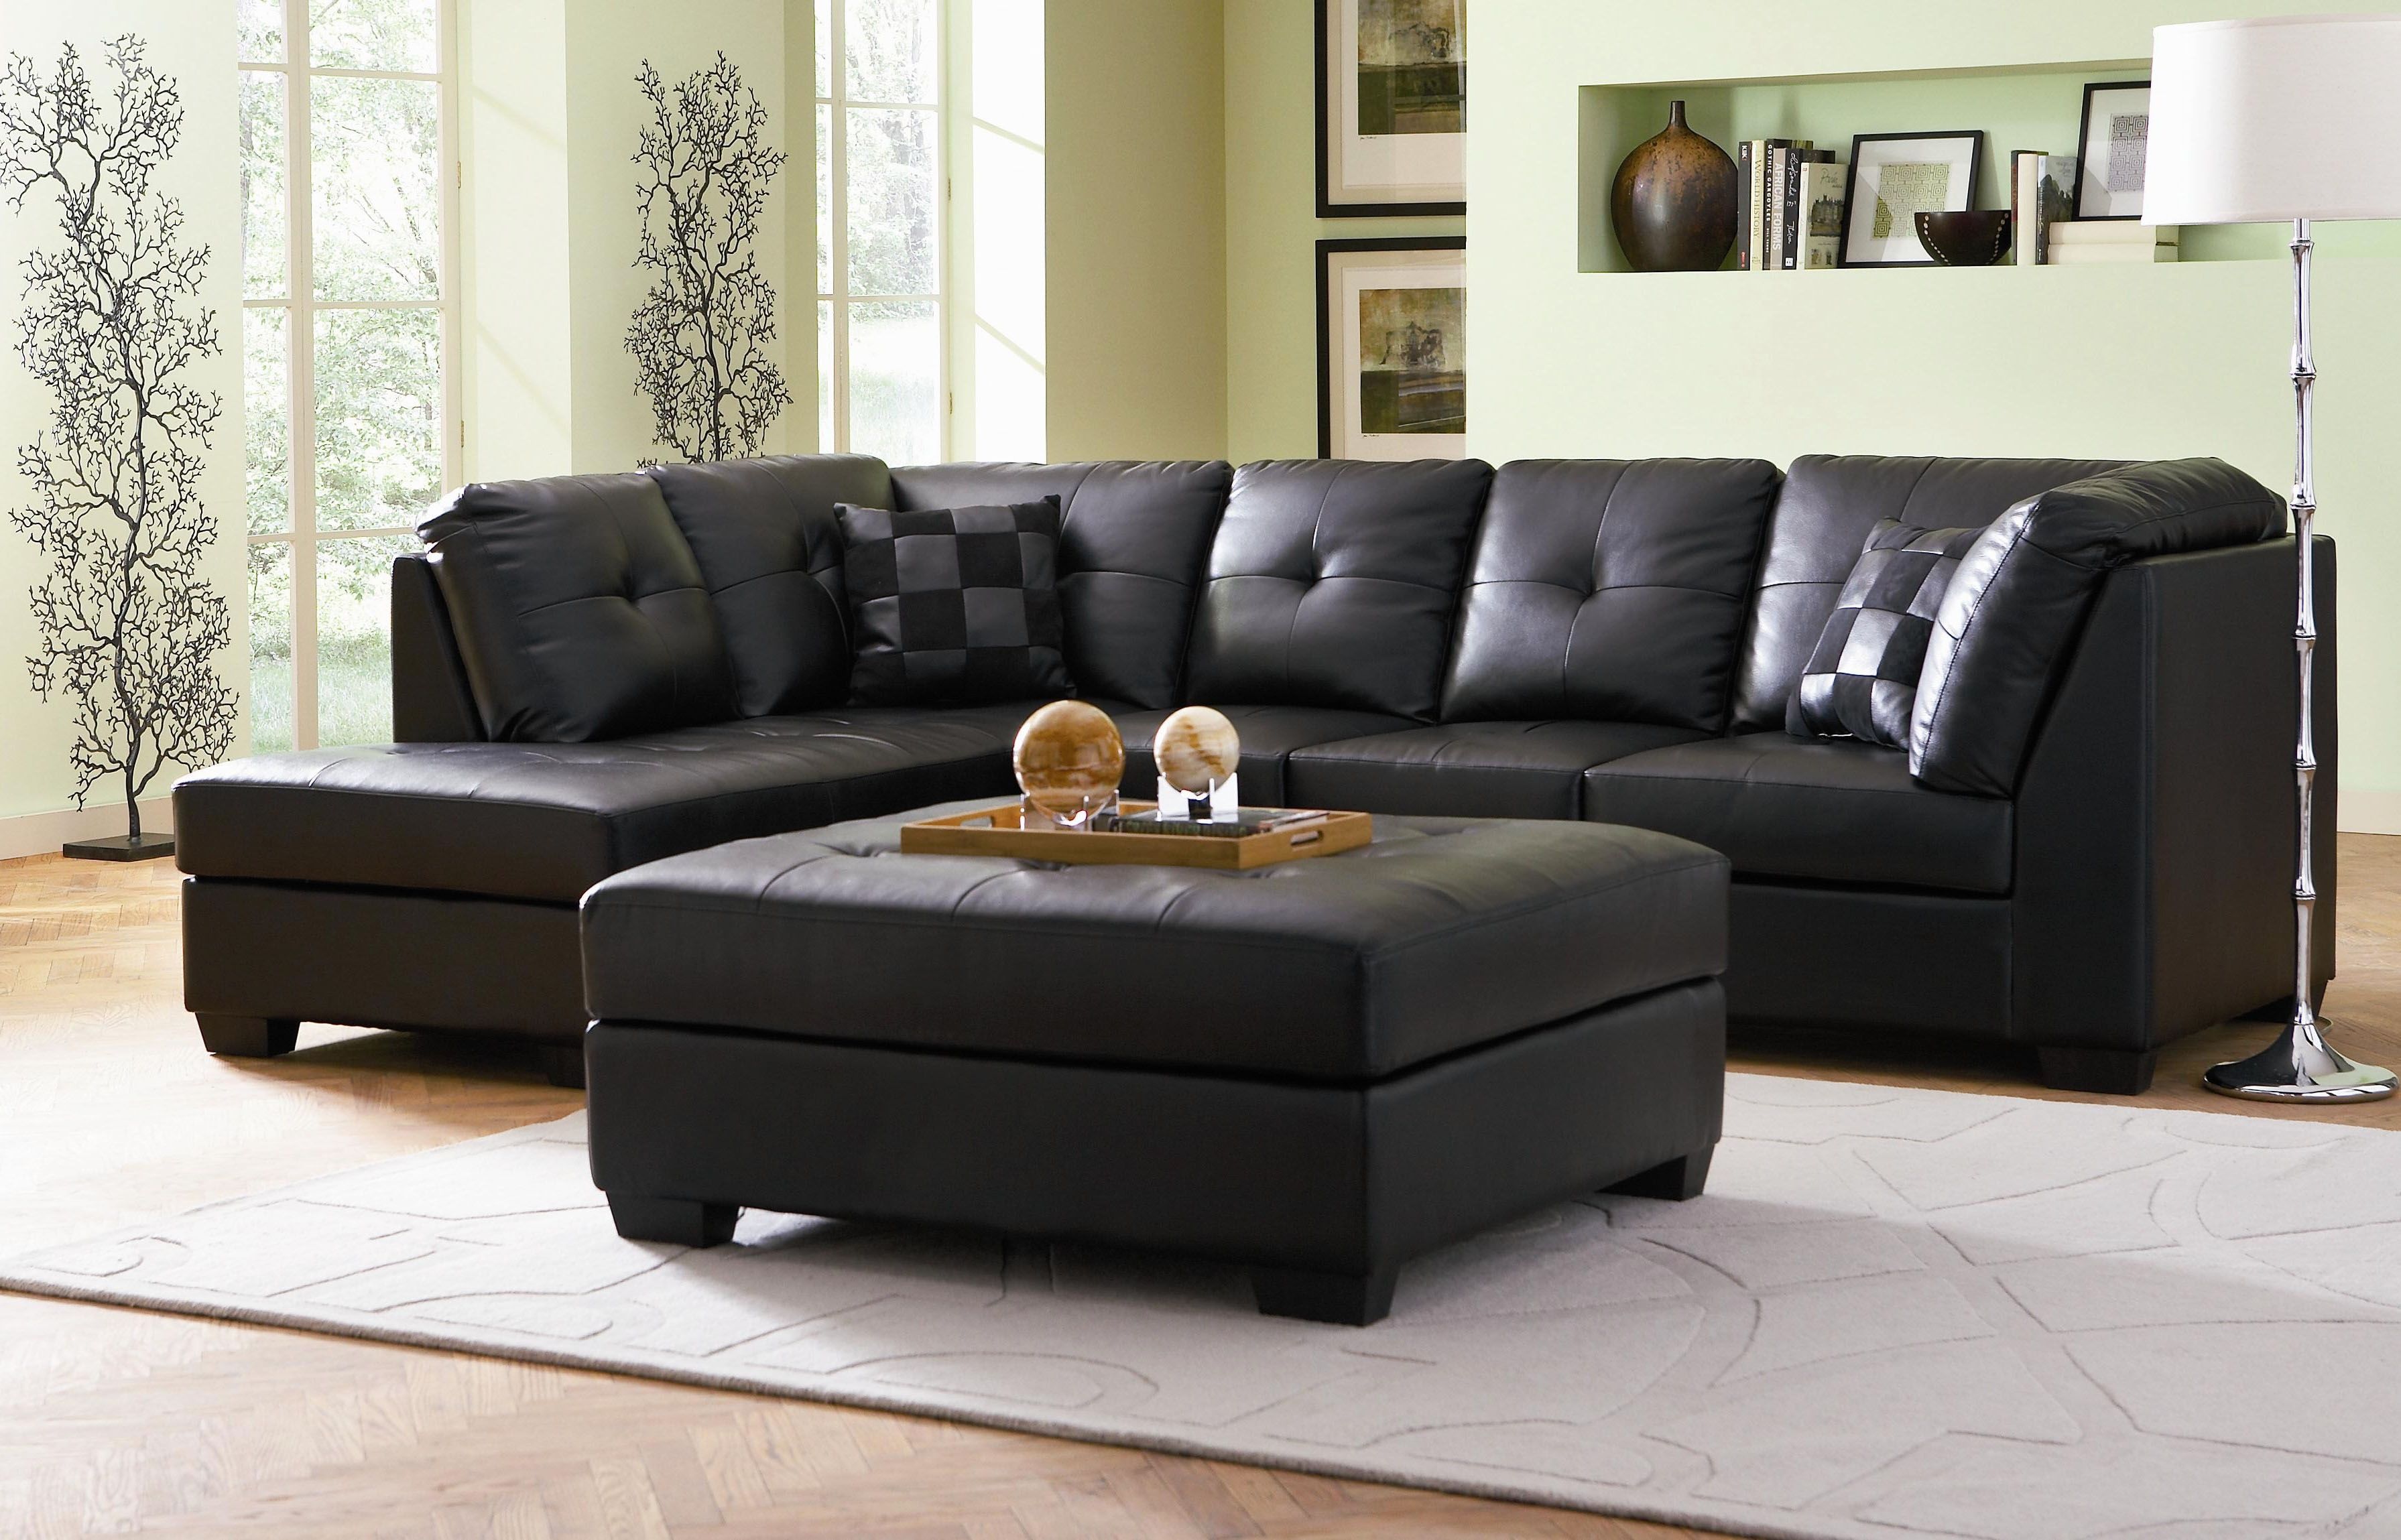 Leather Sectional Sofa For Small Living Room In Black Color With Regarding Leather Sectionals With Chaise And Ottoman (View 13 of 15)